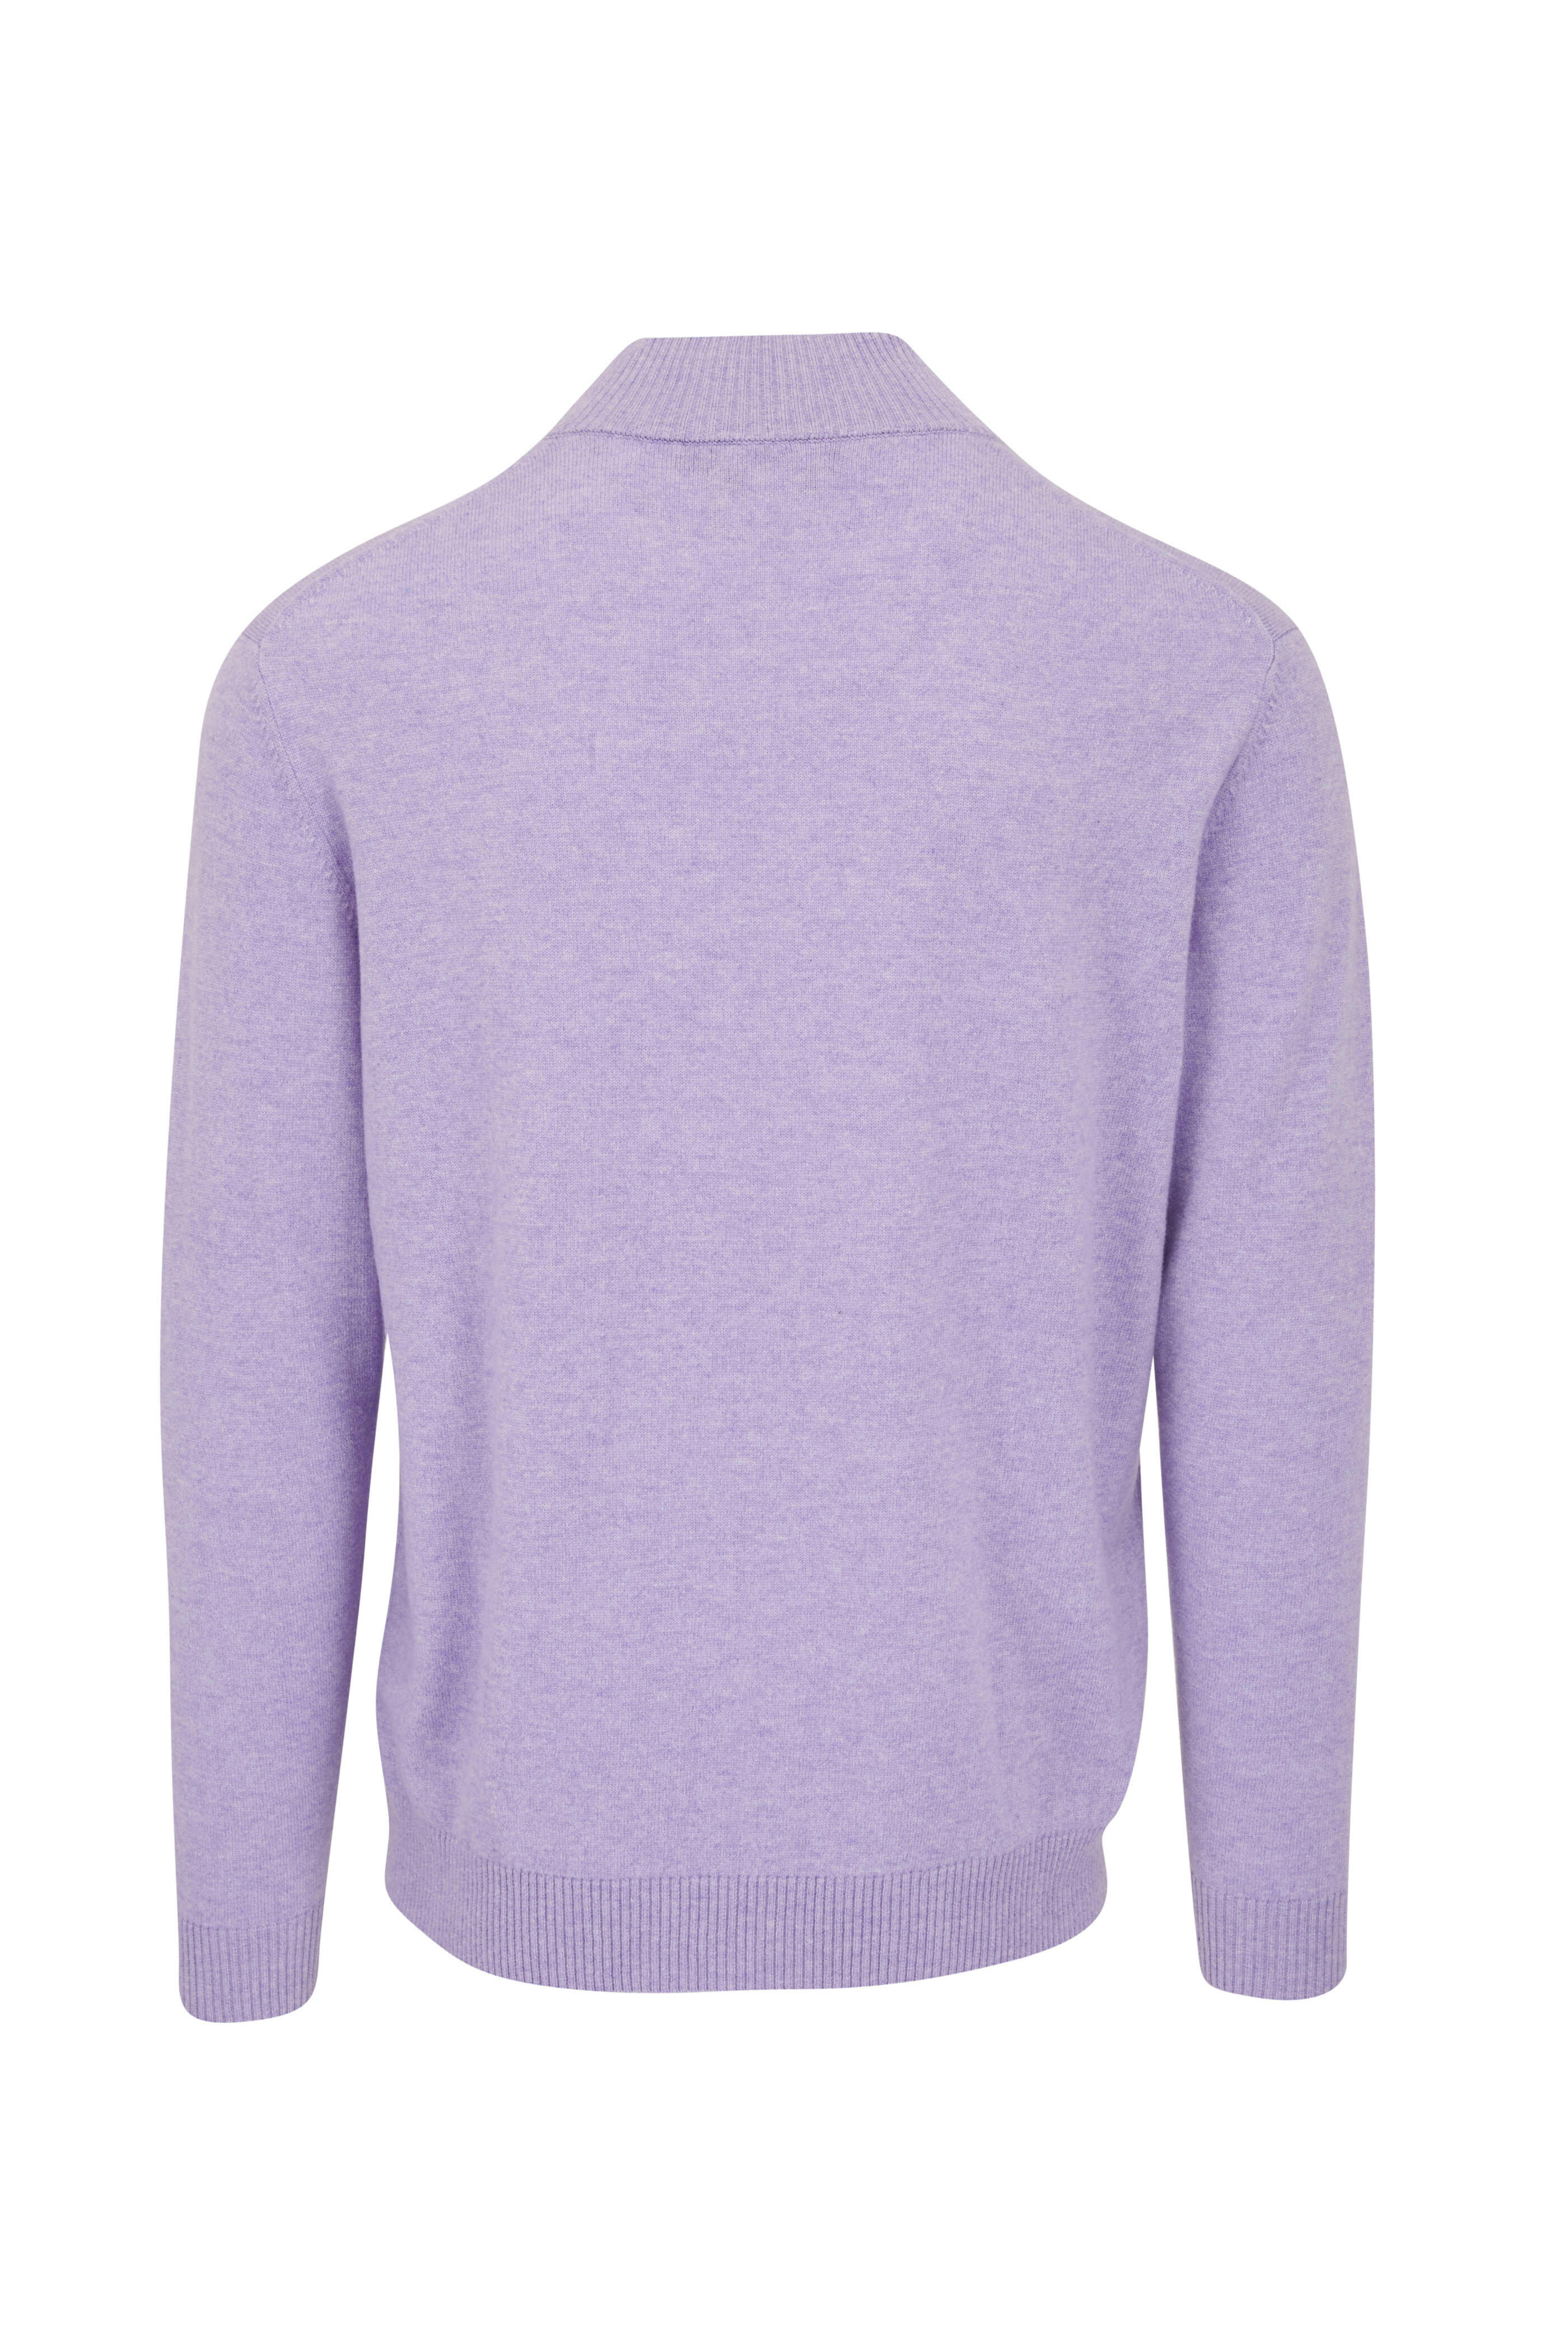 Kinross - Thistle Cashmere Quarter Zip Pullover | Mitchell Stores